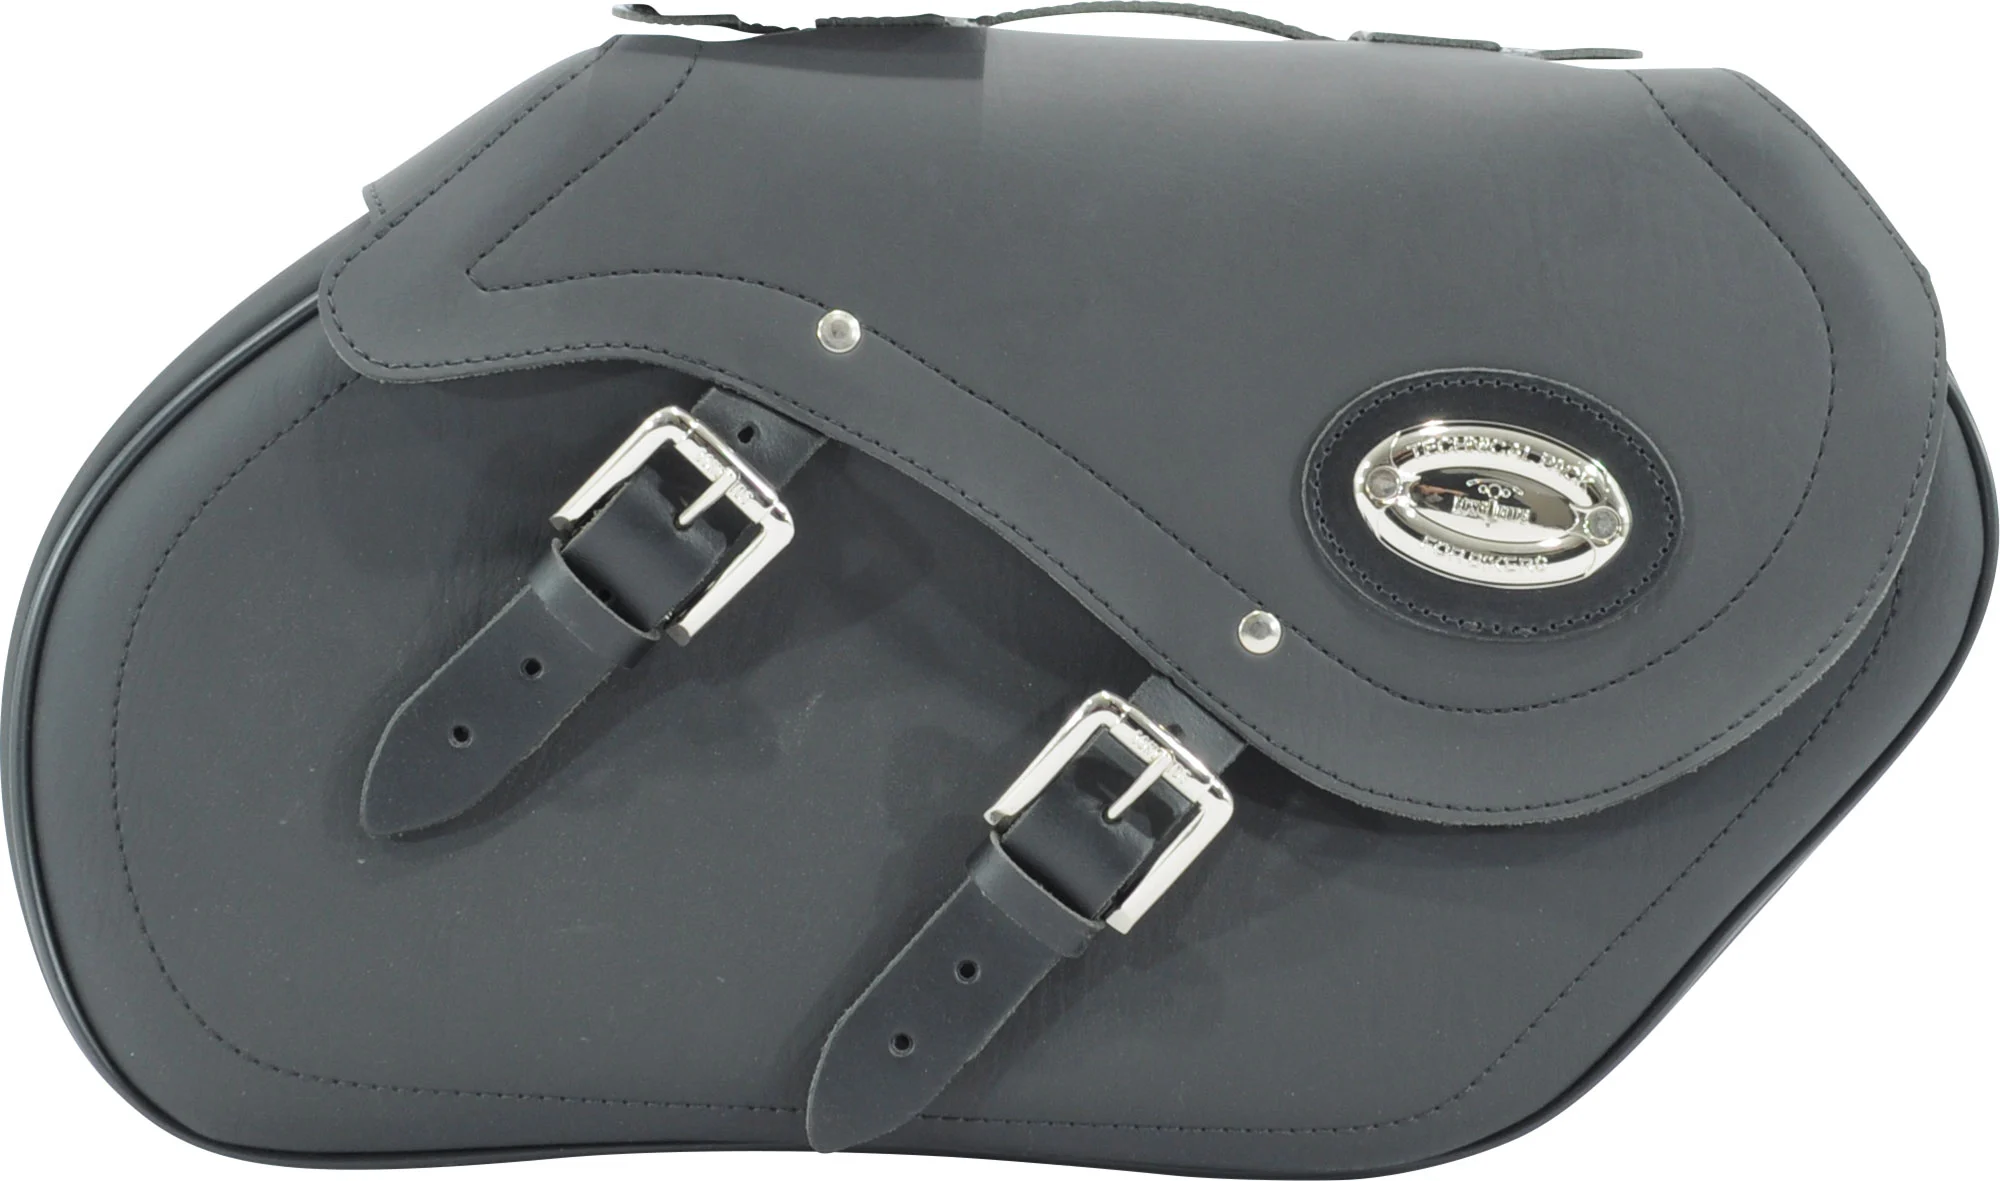 Saddlebags Holders - Clickfix Standard for Motorcycles - LONGRIDE